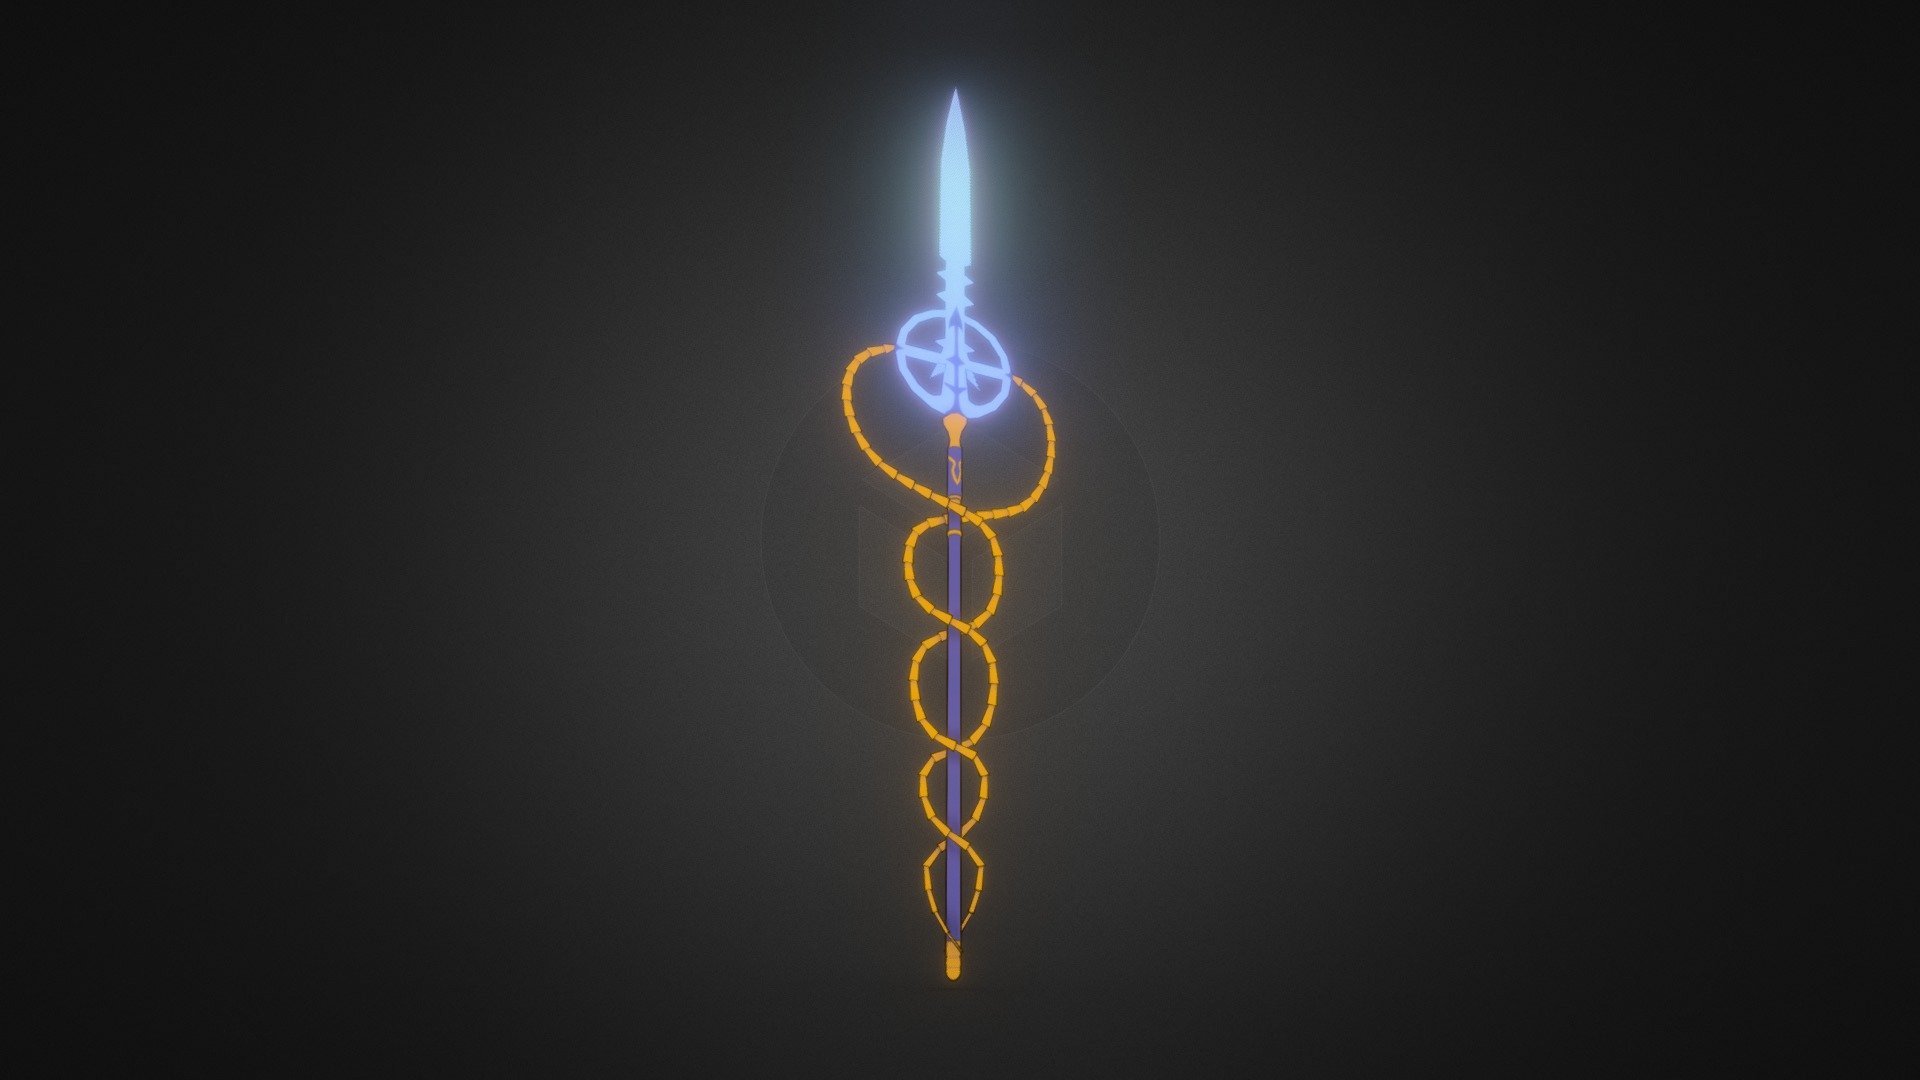 Texture size 1024x1024 in albedo/emission

Textures painted everything in blender and krita

Weapon spear from anime - True Longinus [High School DxD] - 3D model by Darkinggq 3d model